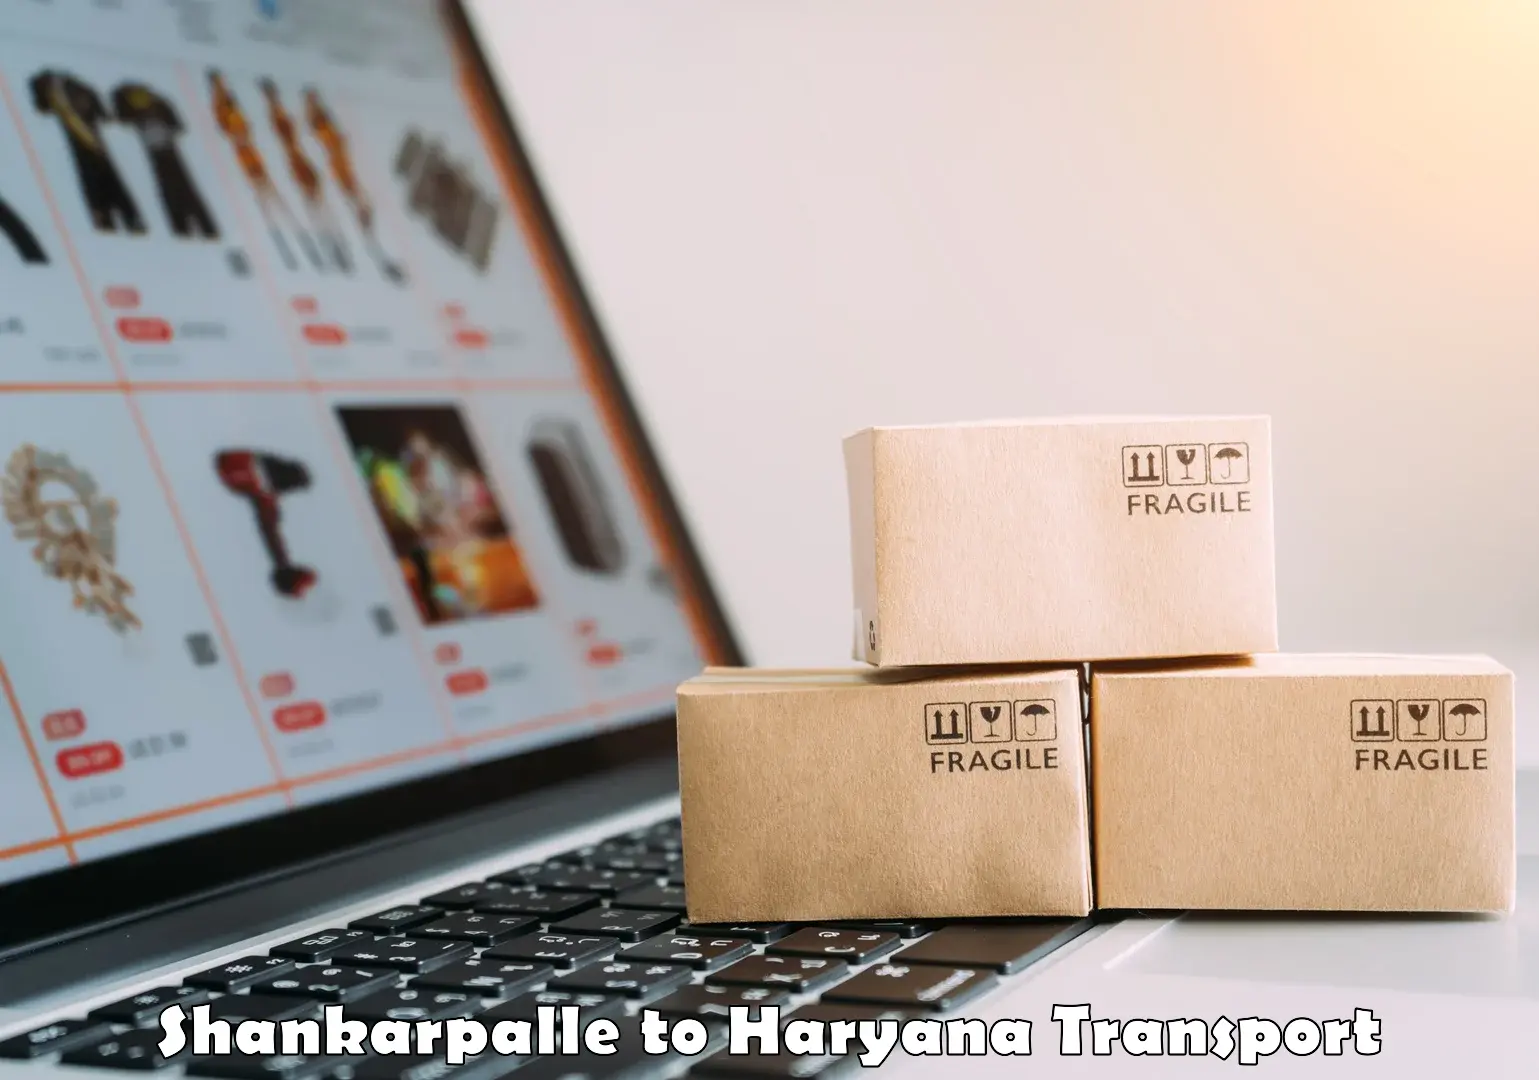 Delivery service Shankarpalle to Haryana